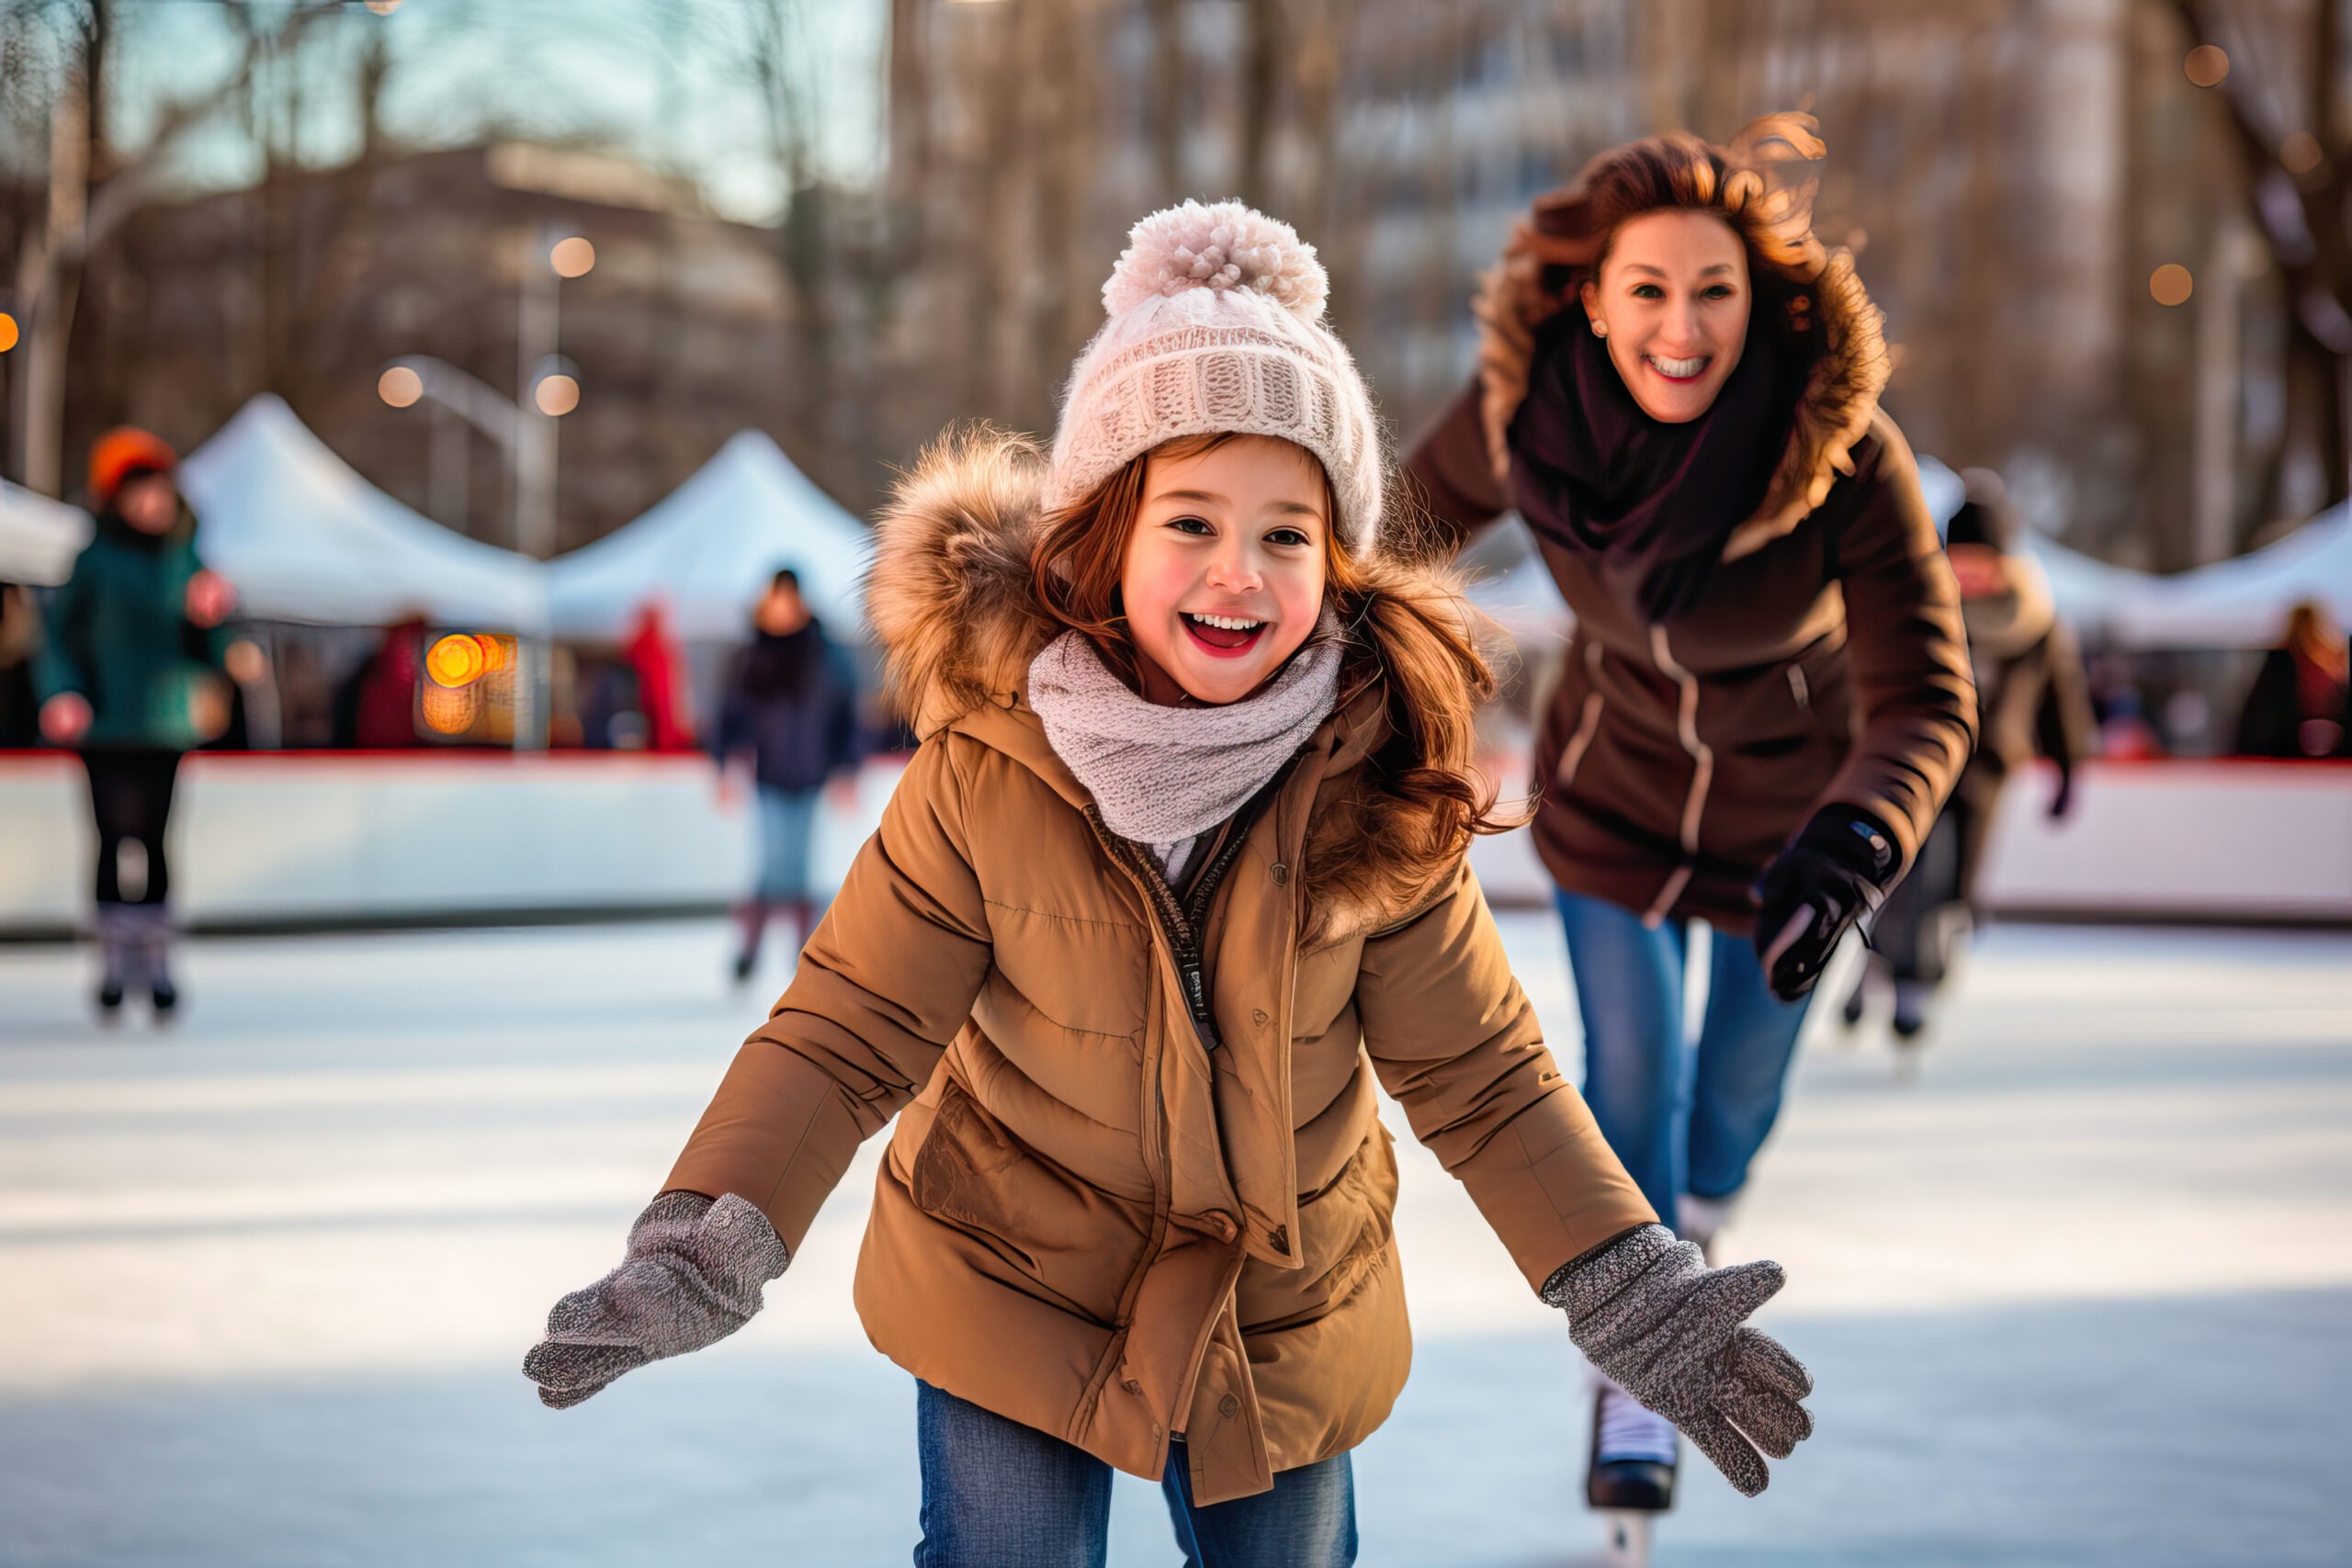 In Winter : Mother and daughter ice skating on a rink in the city